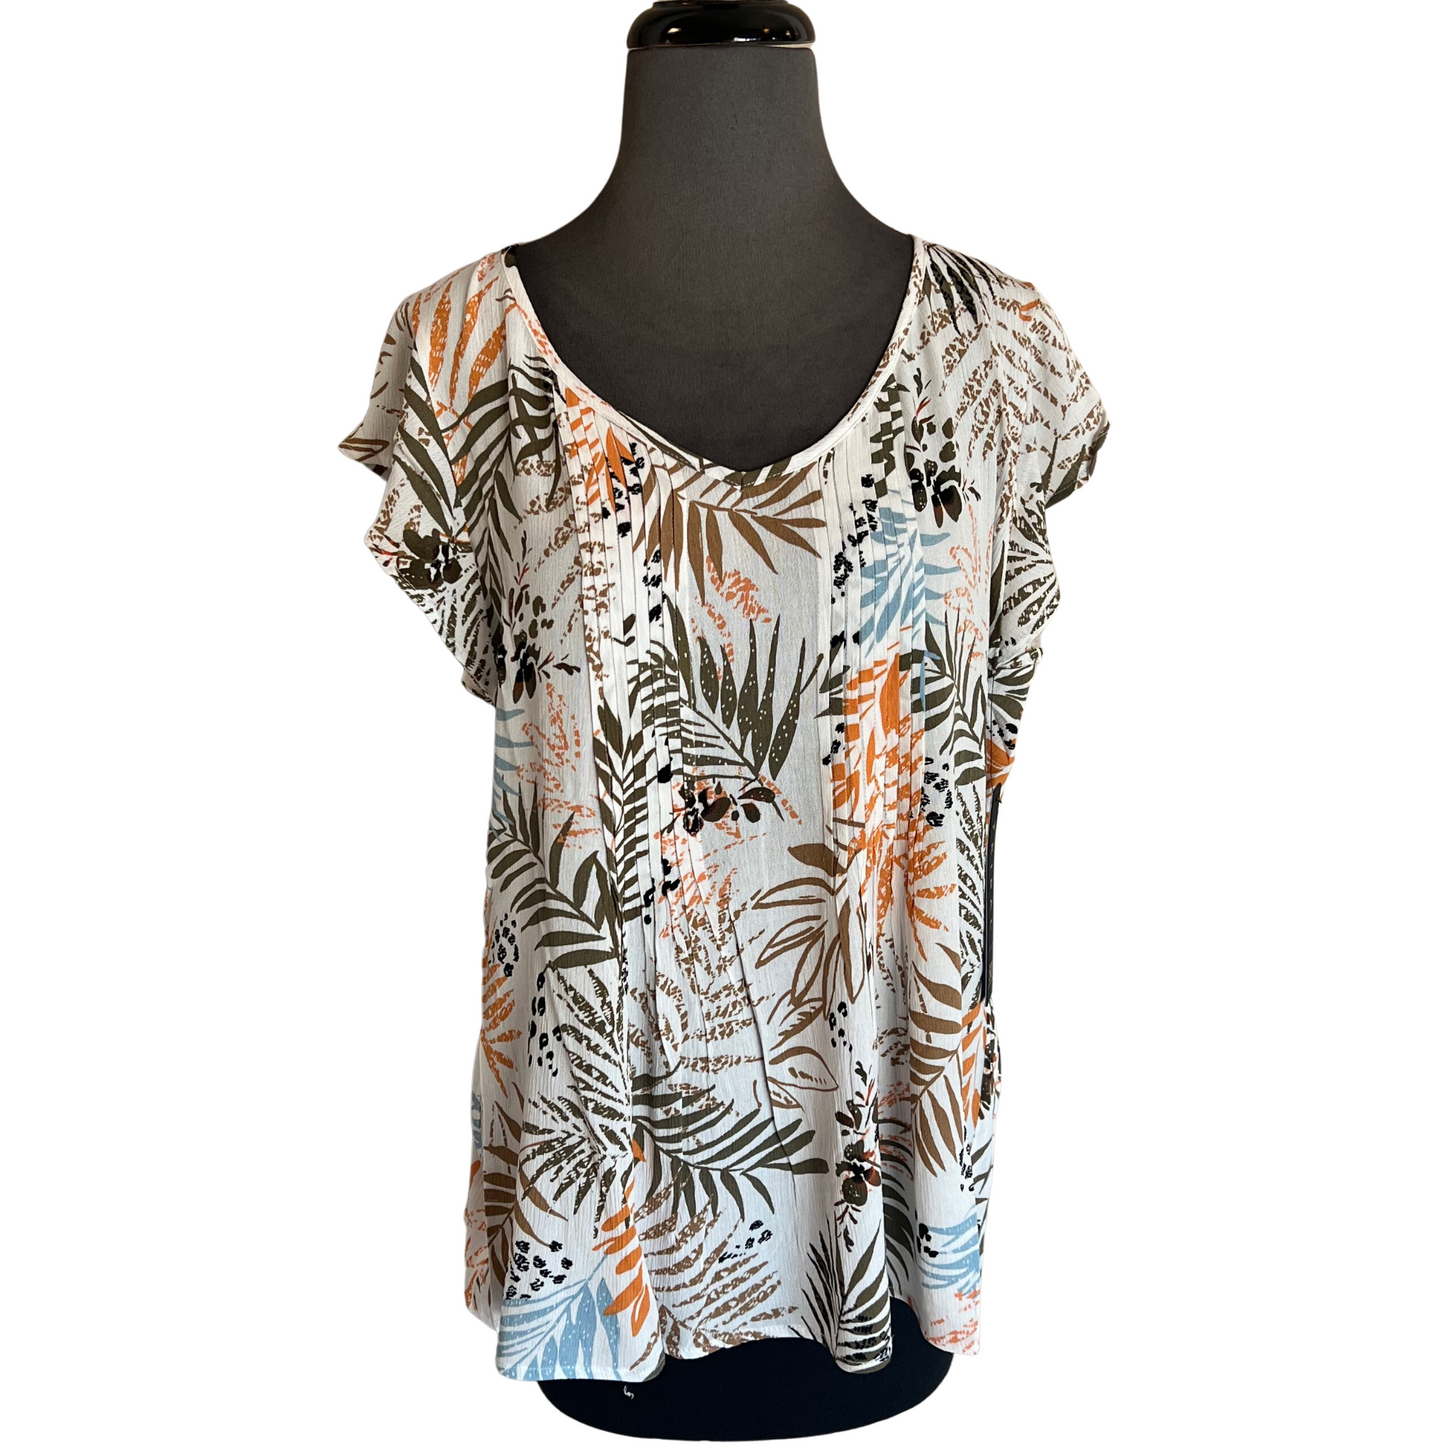 This lightweight Flutter Sleeve Top from Tribal features pleats and a tropical print for a stylish and comfortable look. The scoop neck allows for easy wear and tear, making it a perfect addition to any wardrobe.